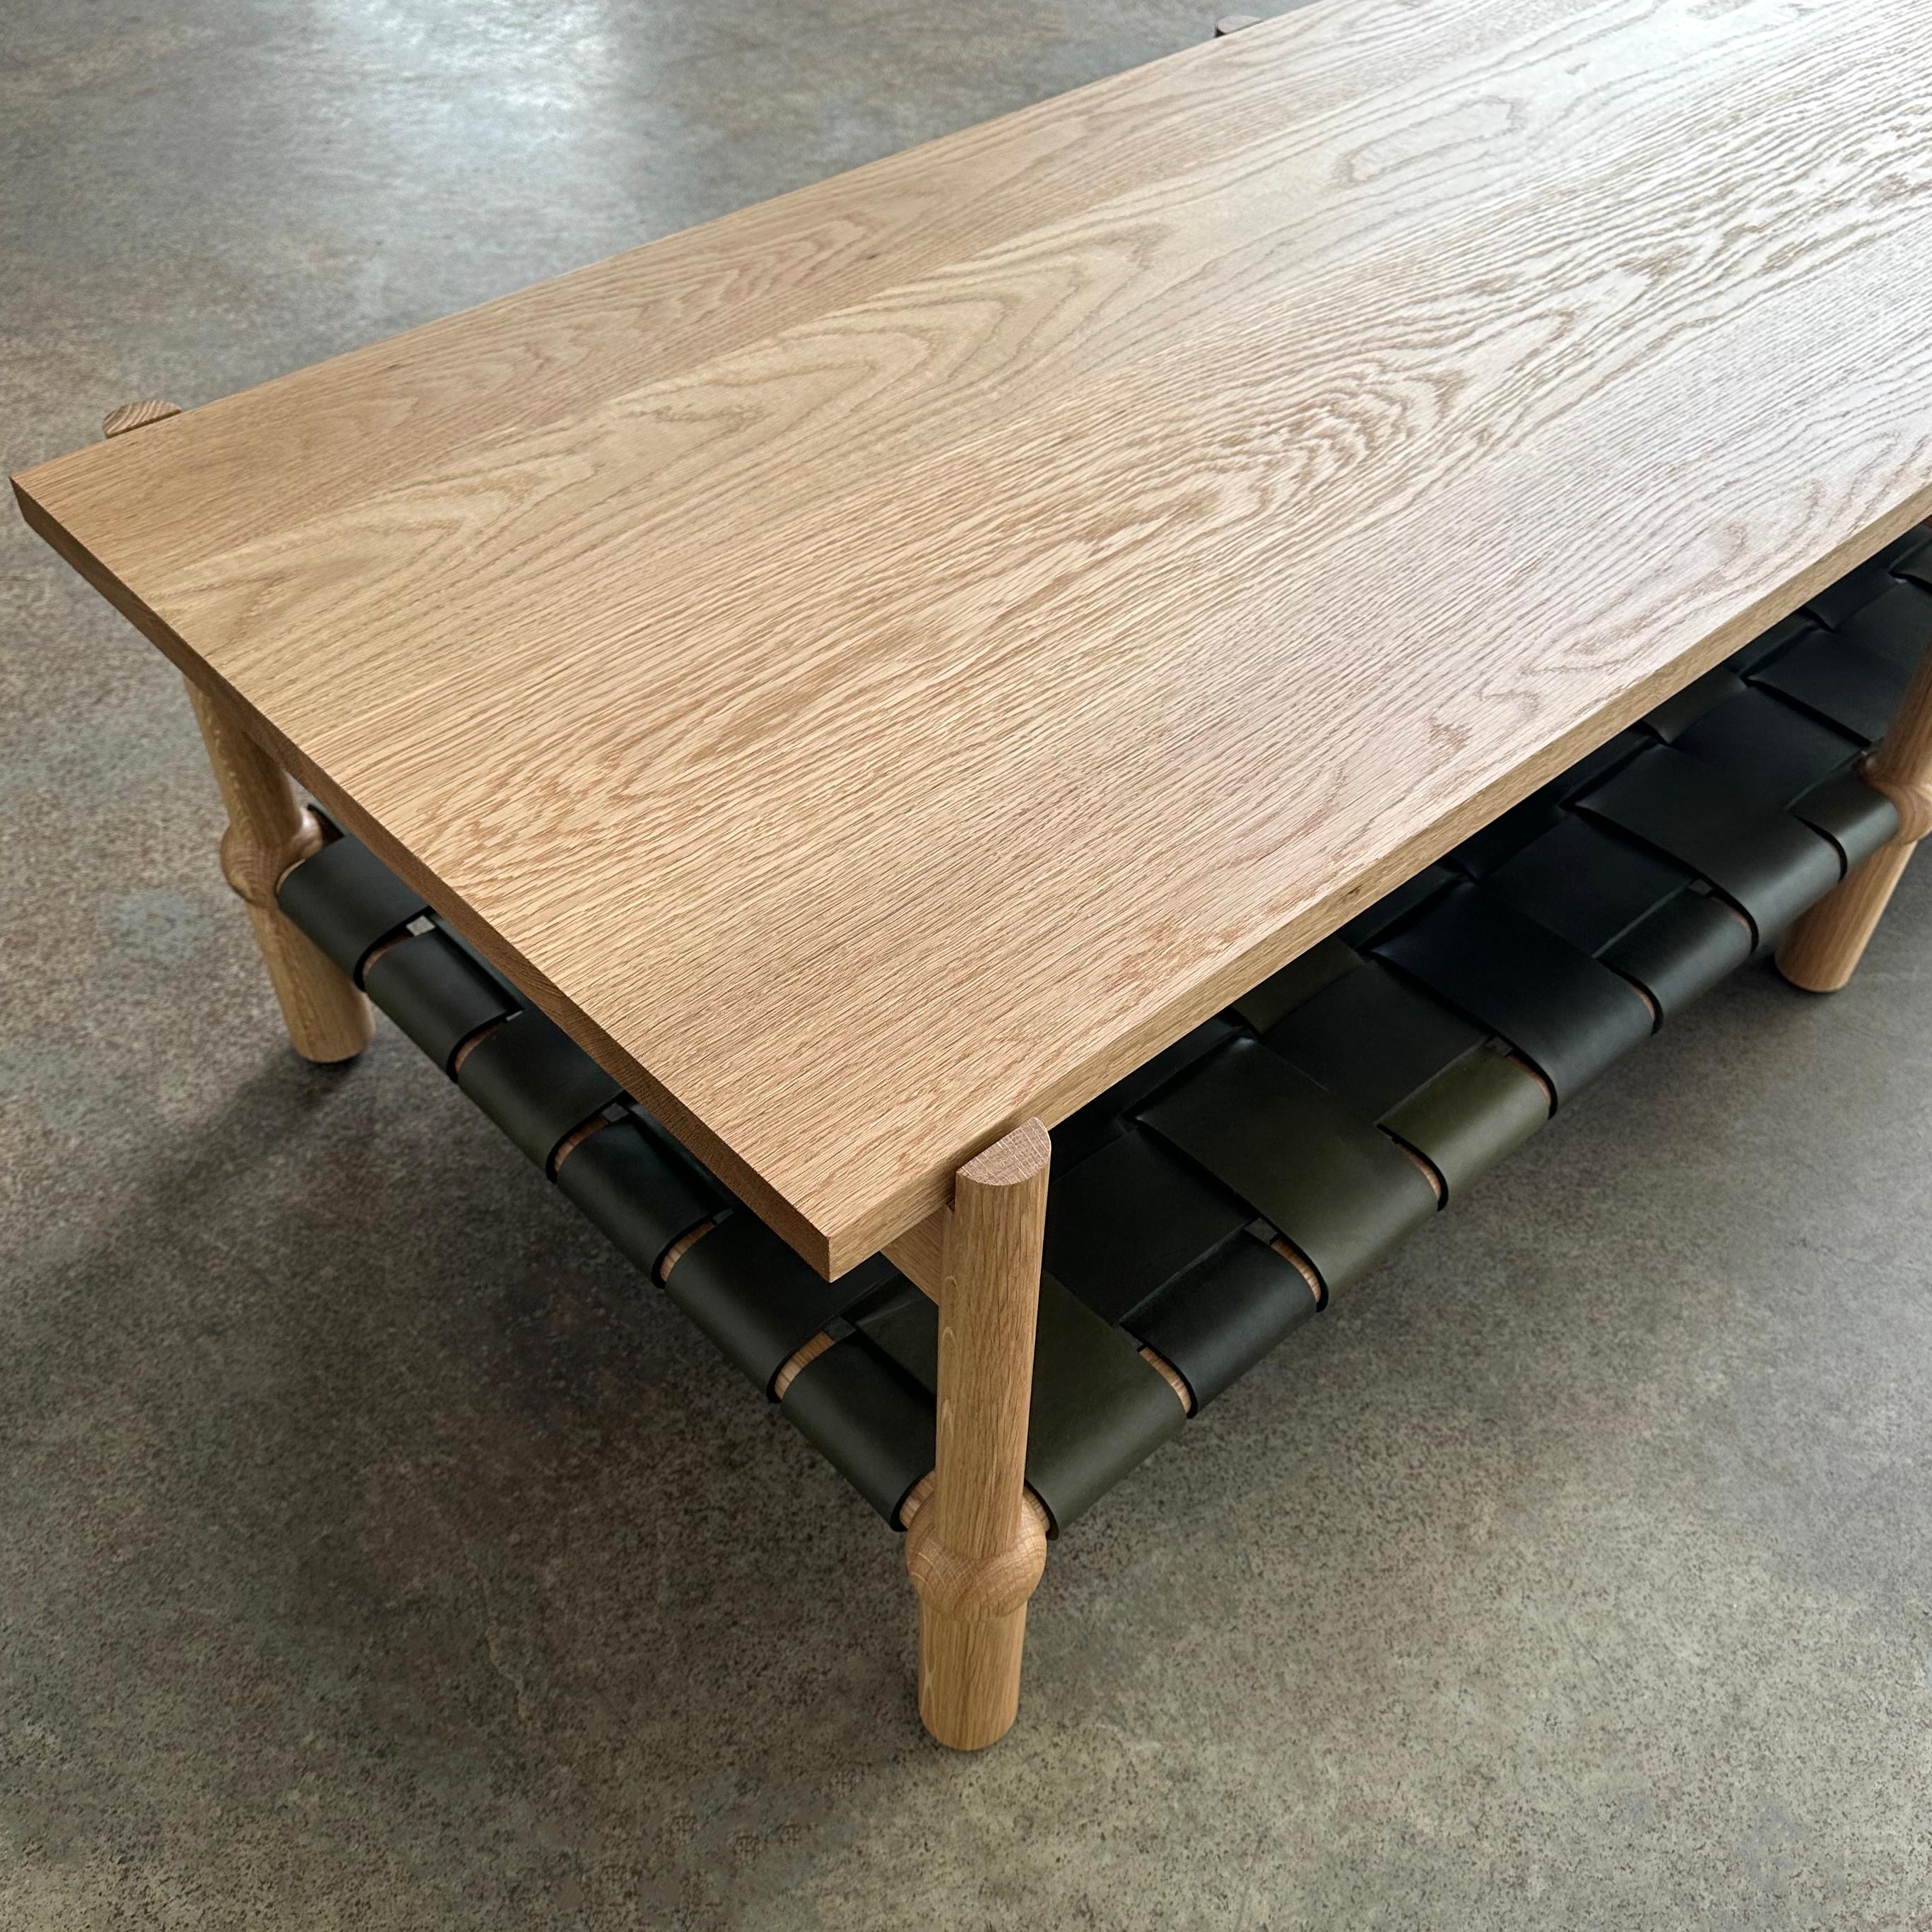 Mae Modern Solid Wood and Woven Leather Coffee Table by Crump and Kwash In New Condition For Sale In Baltimore City, MD